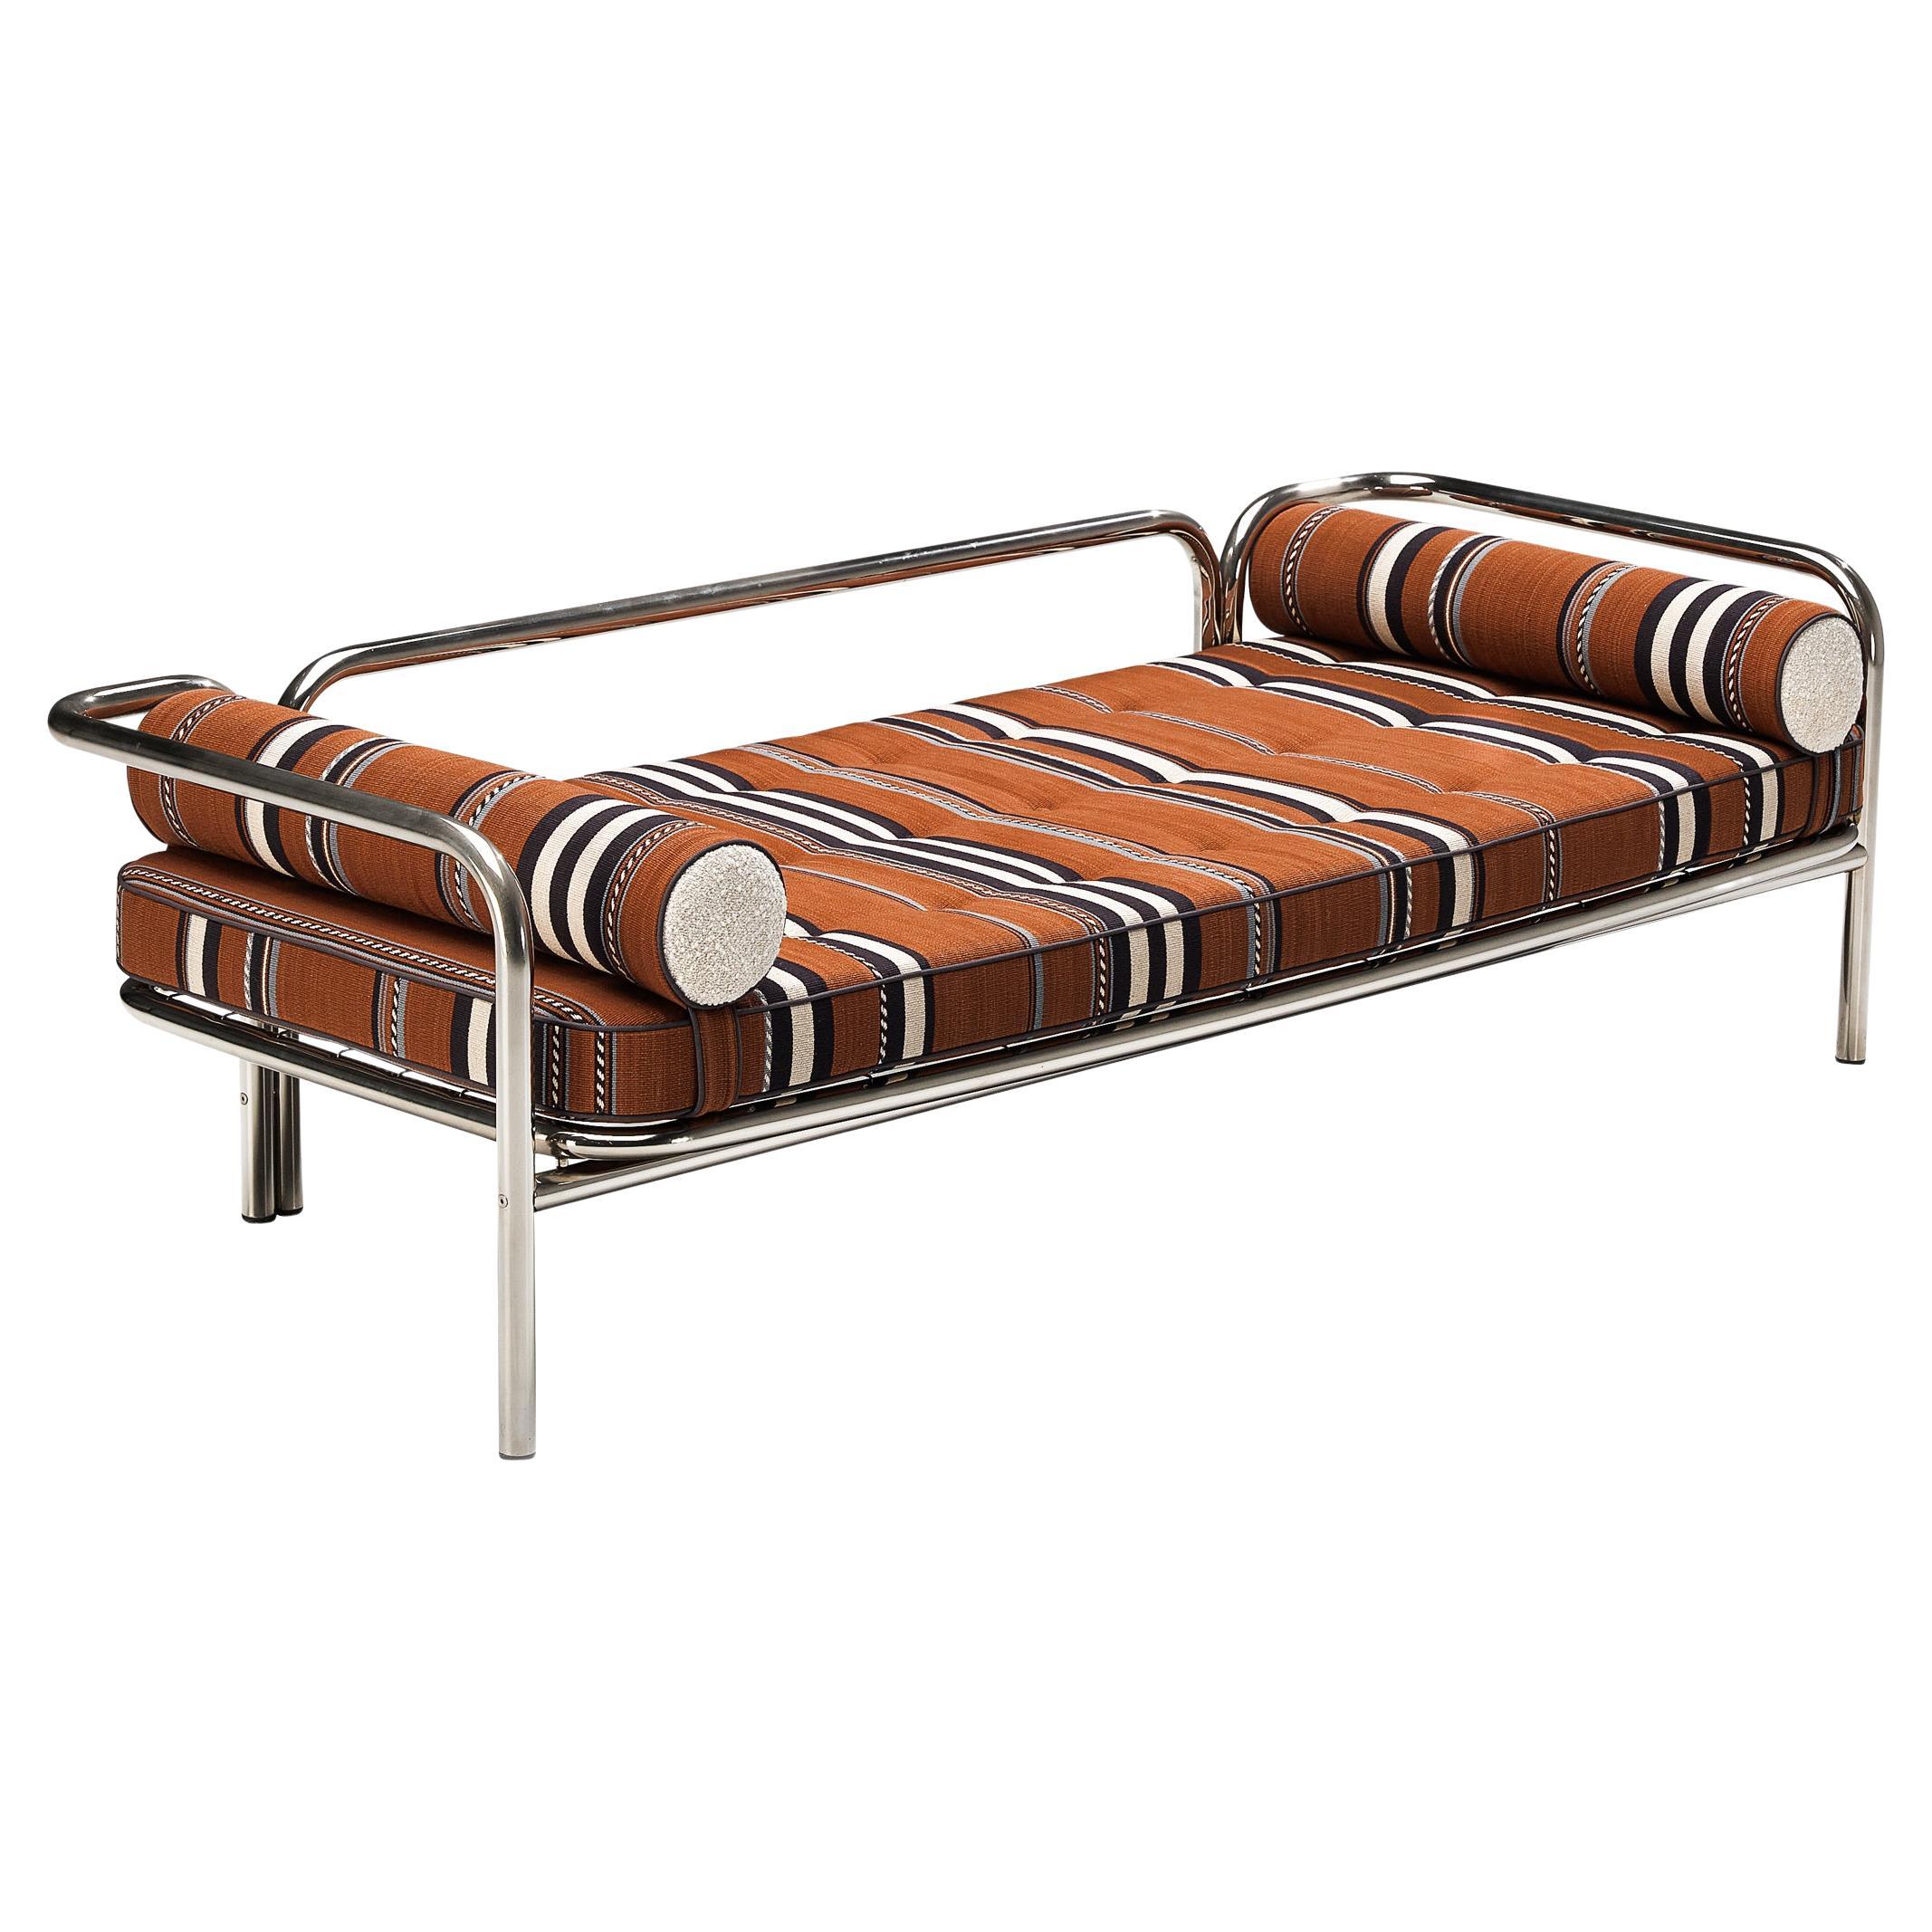 Gae Aulenti for Poltronova 'Locus Solus' Daybed in Chrome-Plated Steel  For Sale